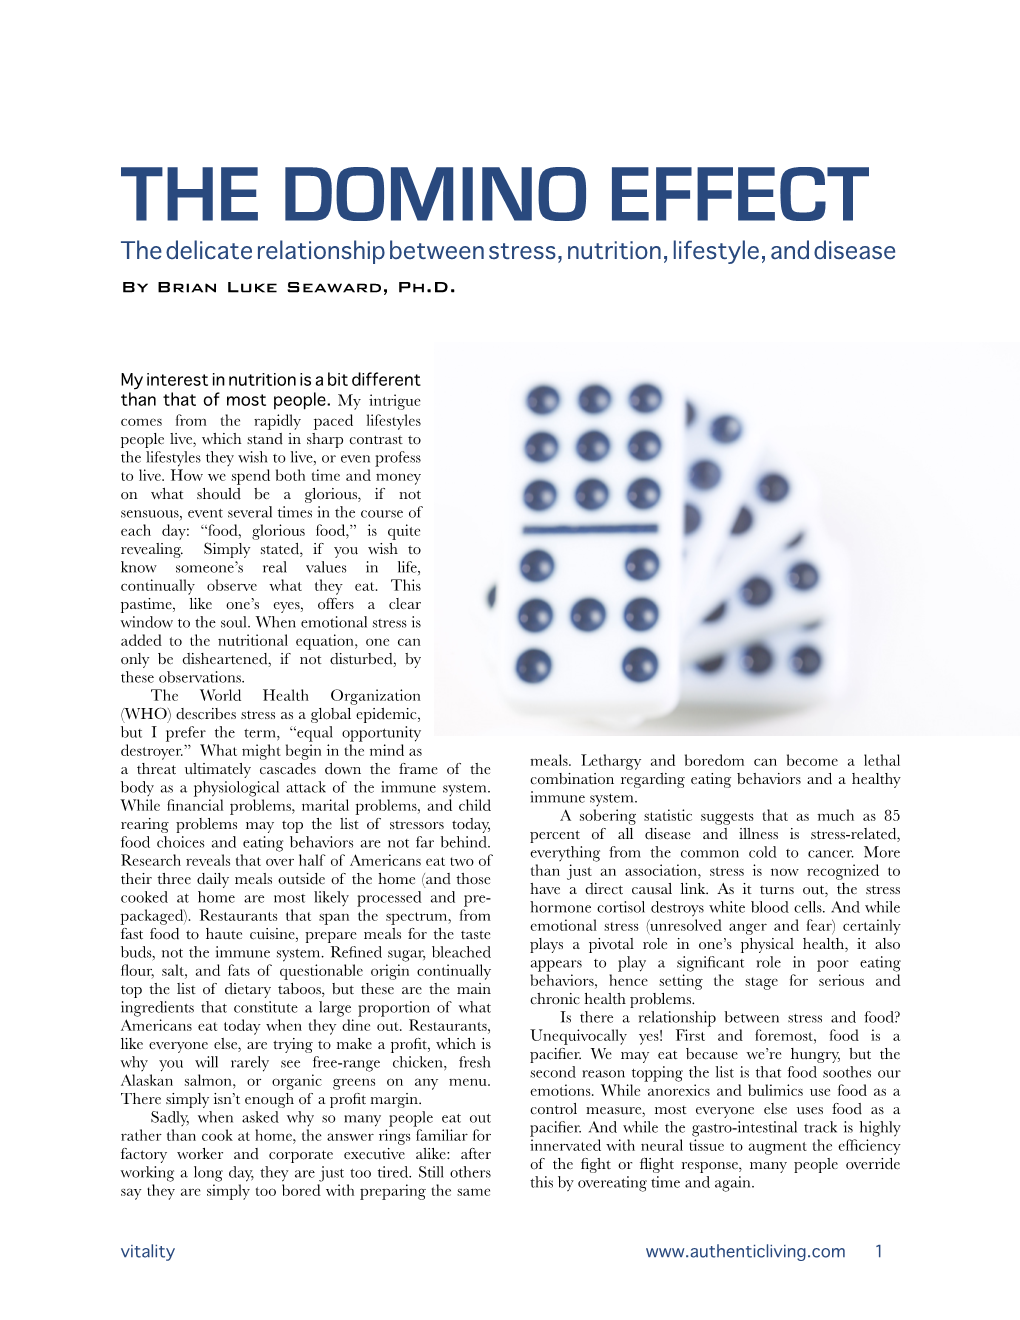 THE DOMINO EFFECT the Delicate Relationship Between Stress, Nutrition, Lifestyle, and Disease by Brian Luke Seaward, Ph.D